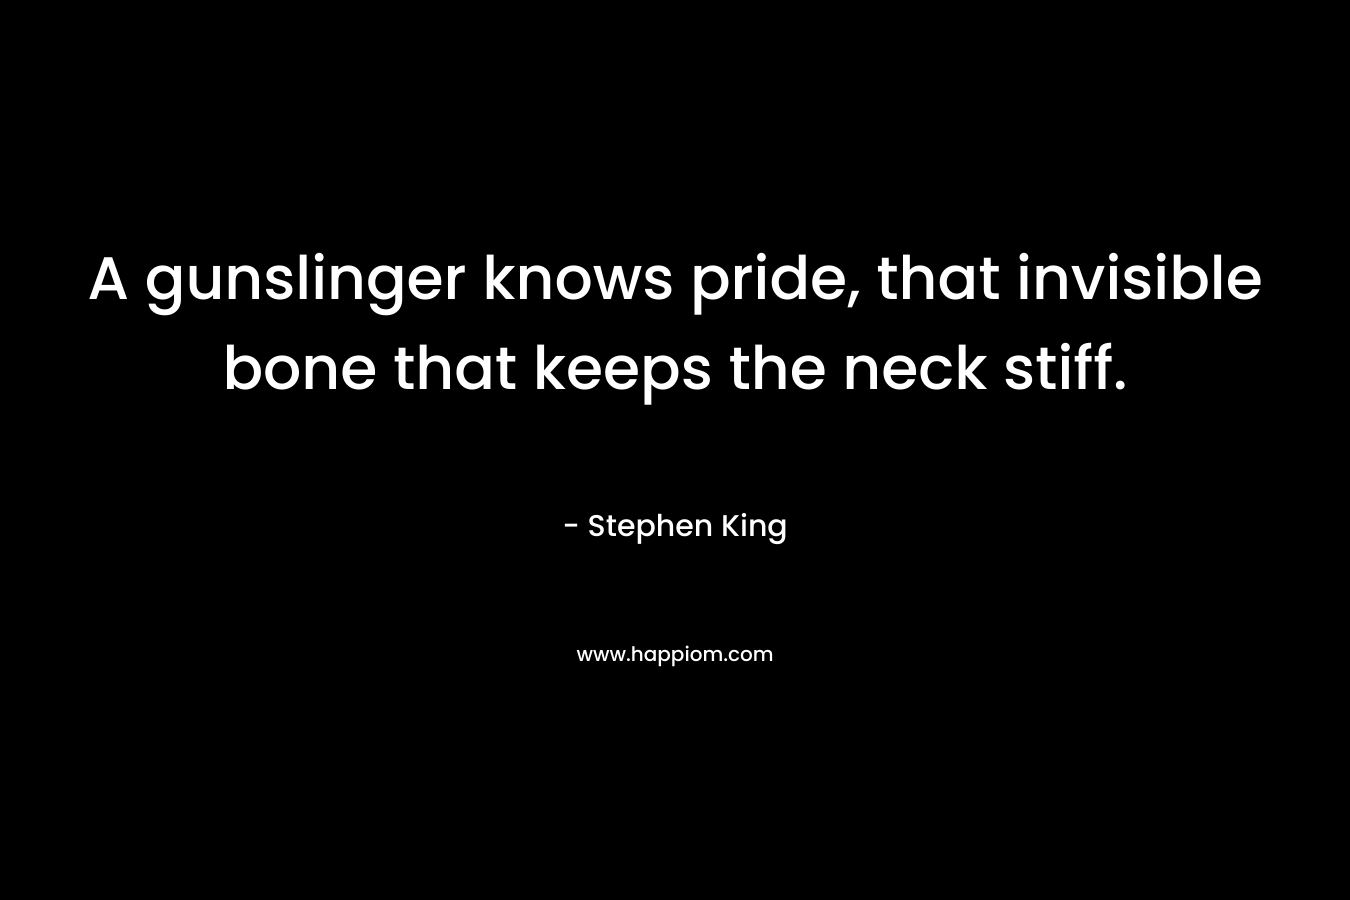 A gunslinger knows pride, that invisible bone that keeps the neck stiff. – Stephen King